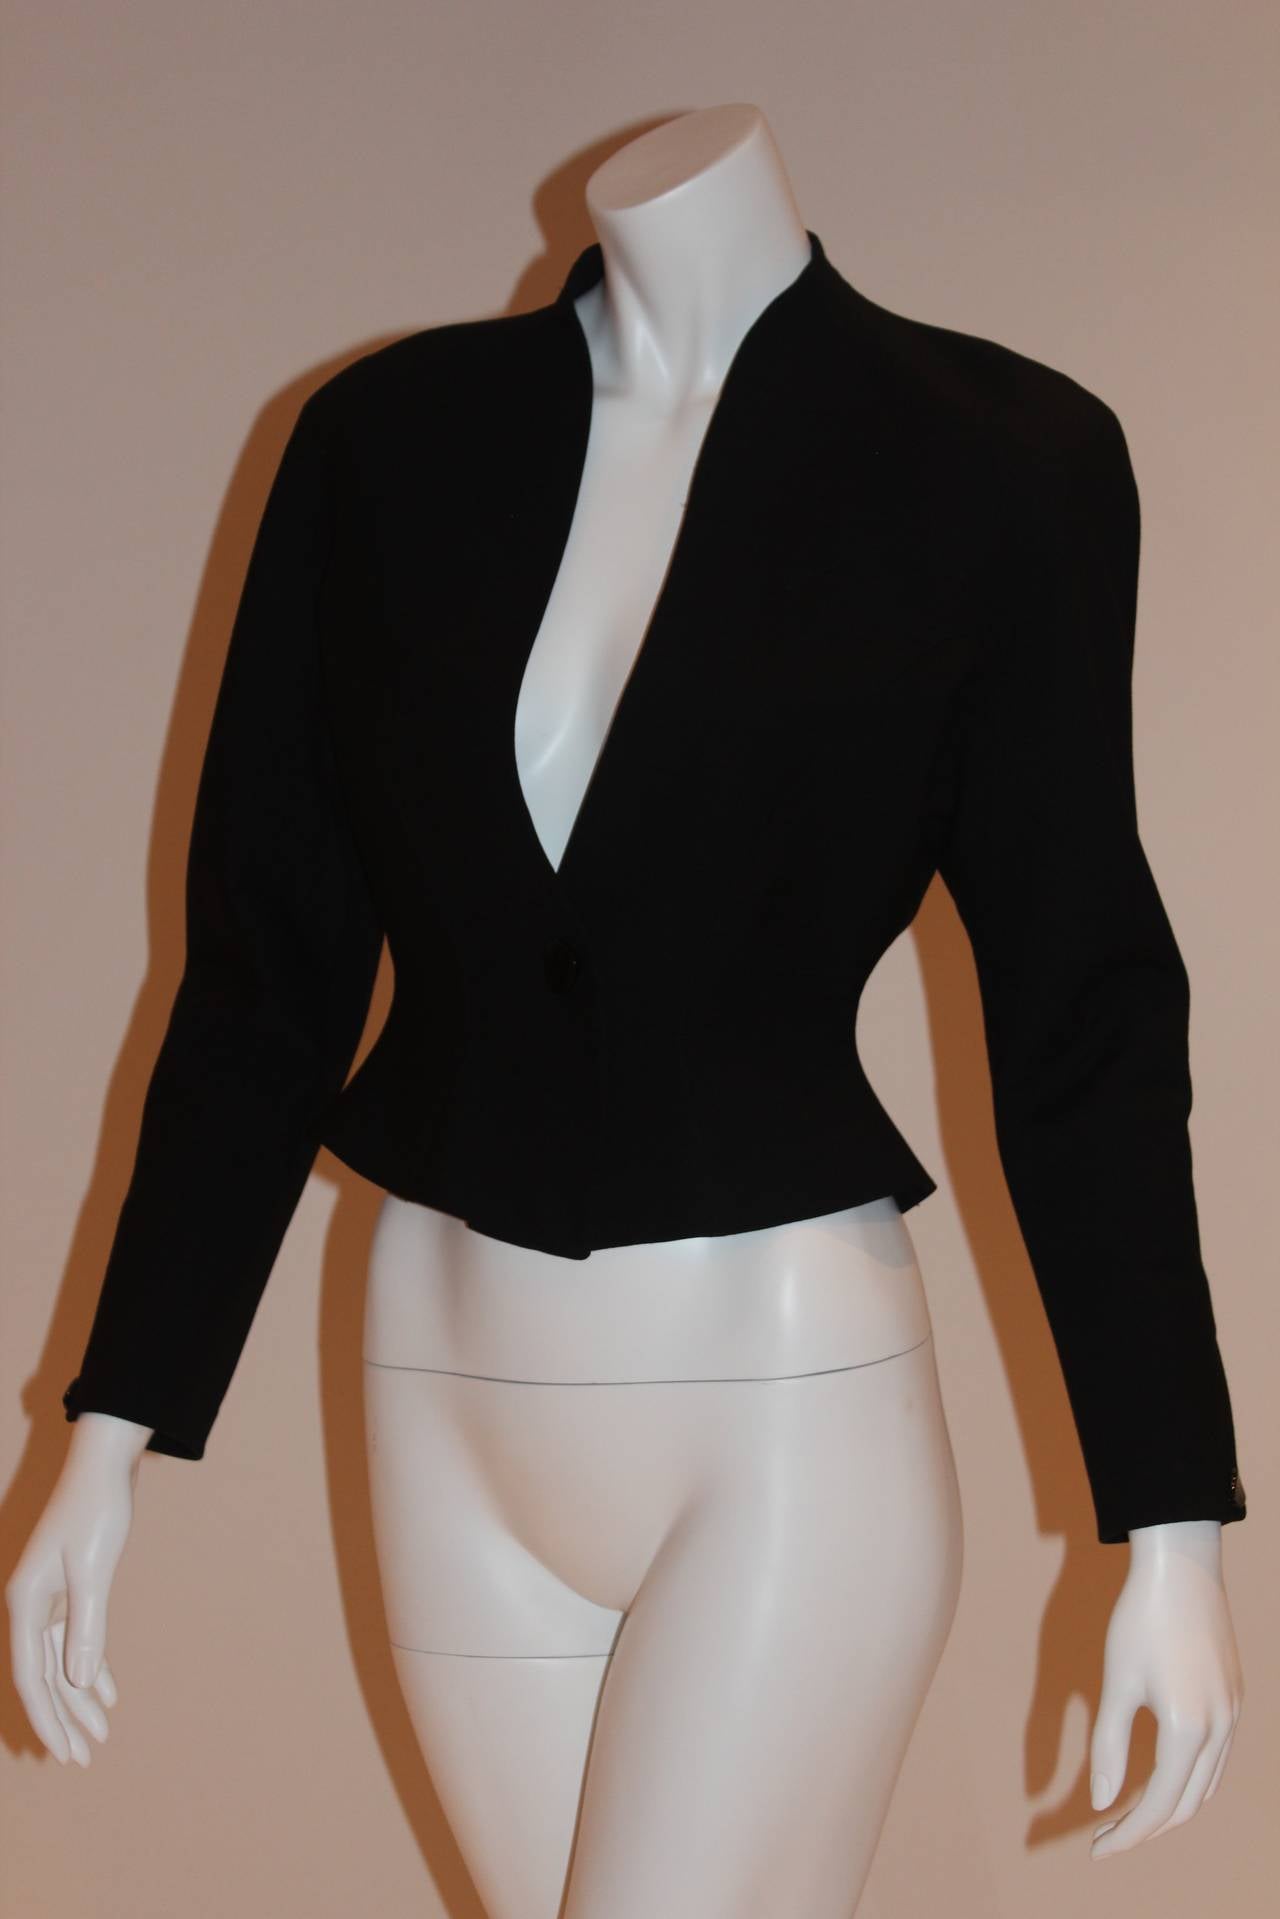 With its complimentary, plunging V-neckline and front button closure, this exceptional Thierry Mugler design is absolutely stunning. Jacket is well structured, flattering, and in excellent, barely worn condition.